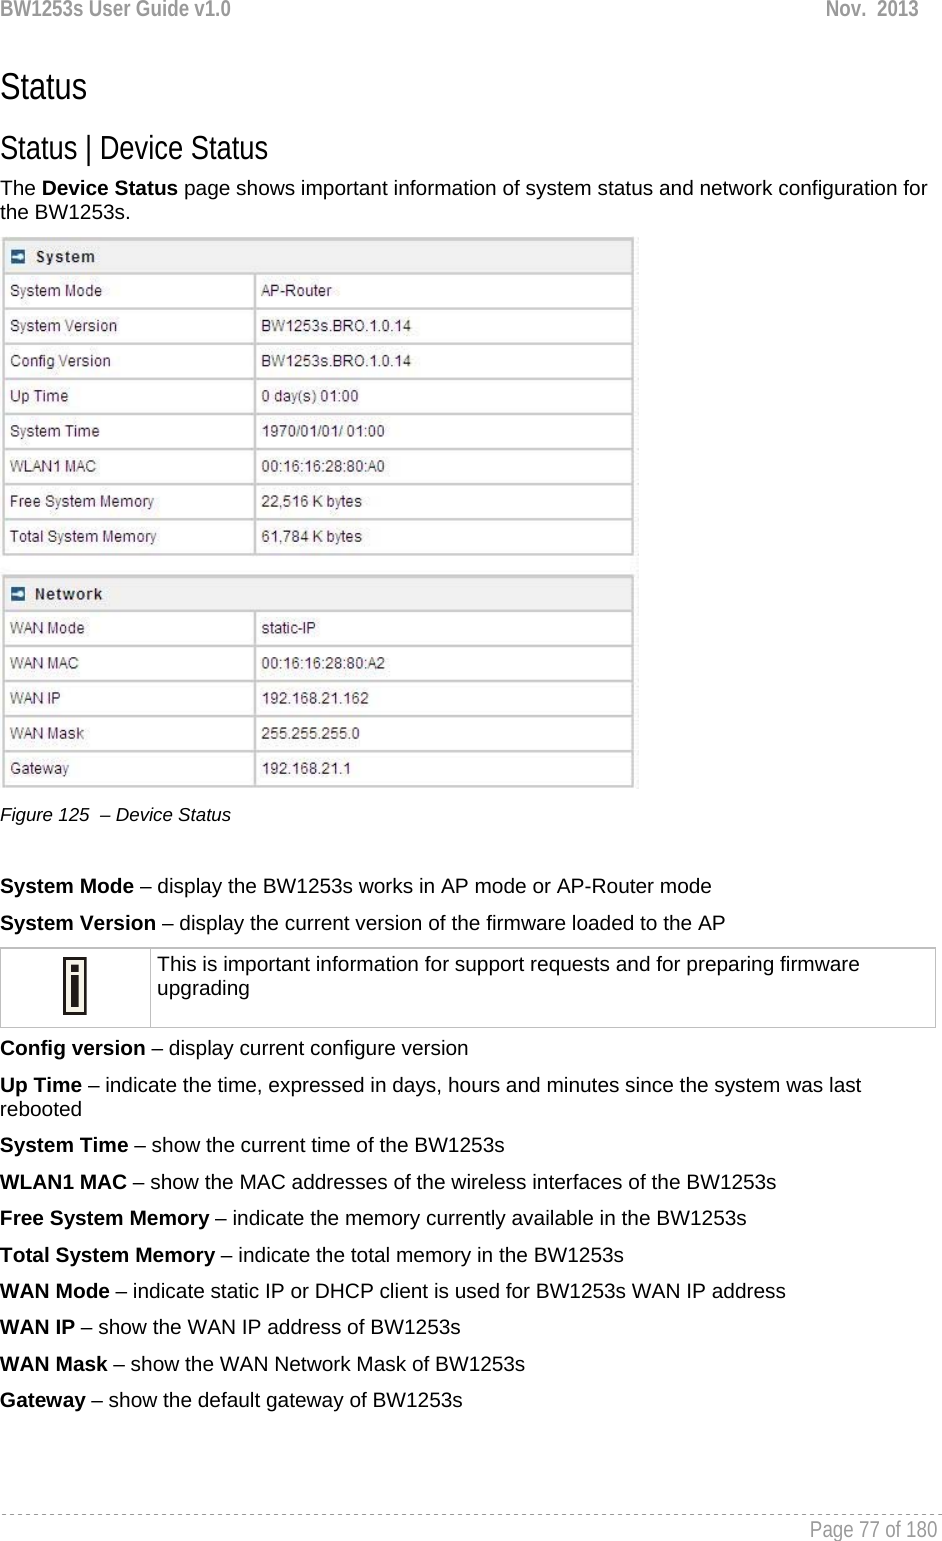 BW1253s User Guide v1.0  Nov.  2013     Page 77 of 180   Status Status | Device Status The Device Status page shows important information of system status and network configuration for the BW1253s.  Figure 125  – Device Status  System Mode – display the BW1253s works in AP mode or AP-Router mode System Version – display the current version of the firmware loaded to the AP  This is important information for support requests and for preparing firmware upgrading Config version – display current configure version Up Time – indicate the time, expressed in days, hours and minutes since the system was last rebooted System Time – show the current time of the BW1253s WLAN1 MAC – show the MAC addresses of the wireless interfaces of the BW1253s Free System Memory – indicate the memory currently available in the BW1253s Total System Memory – indicate the total memory in the BW1253s WAN Mode – indicate static IP or DHCP client is used for BW1253s WAN IP address WAN IP – show the WAN IP address of BW1253s WAN Mask – show the WAN Network Mask of BW1253s Gateway – show the default gateway of BW1253s  